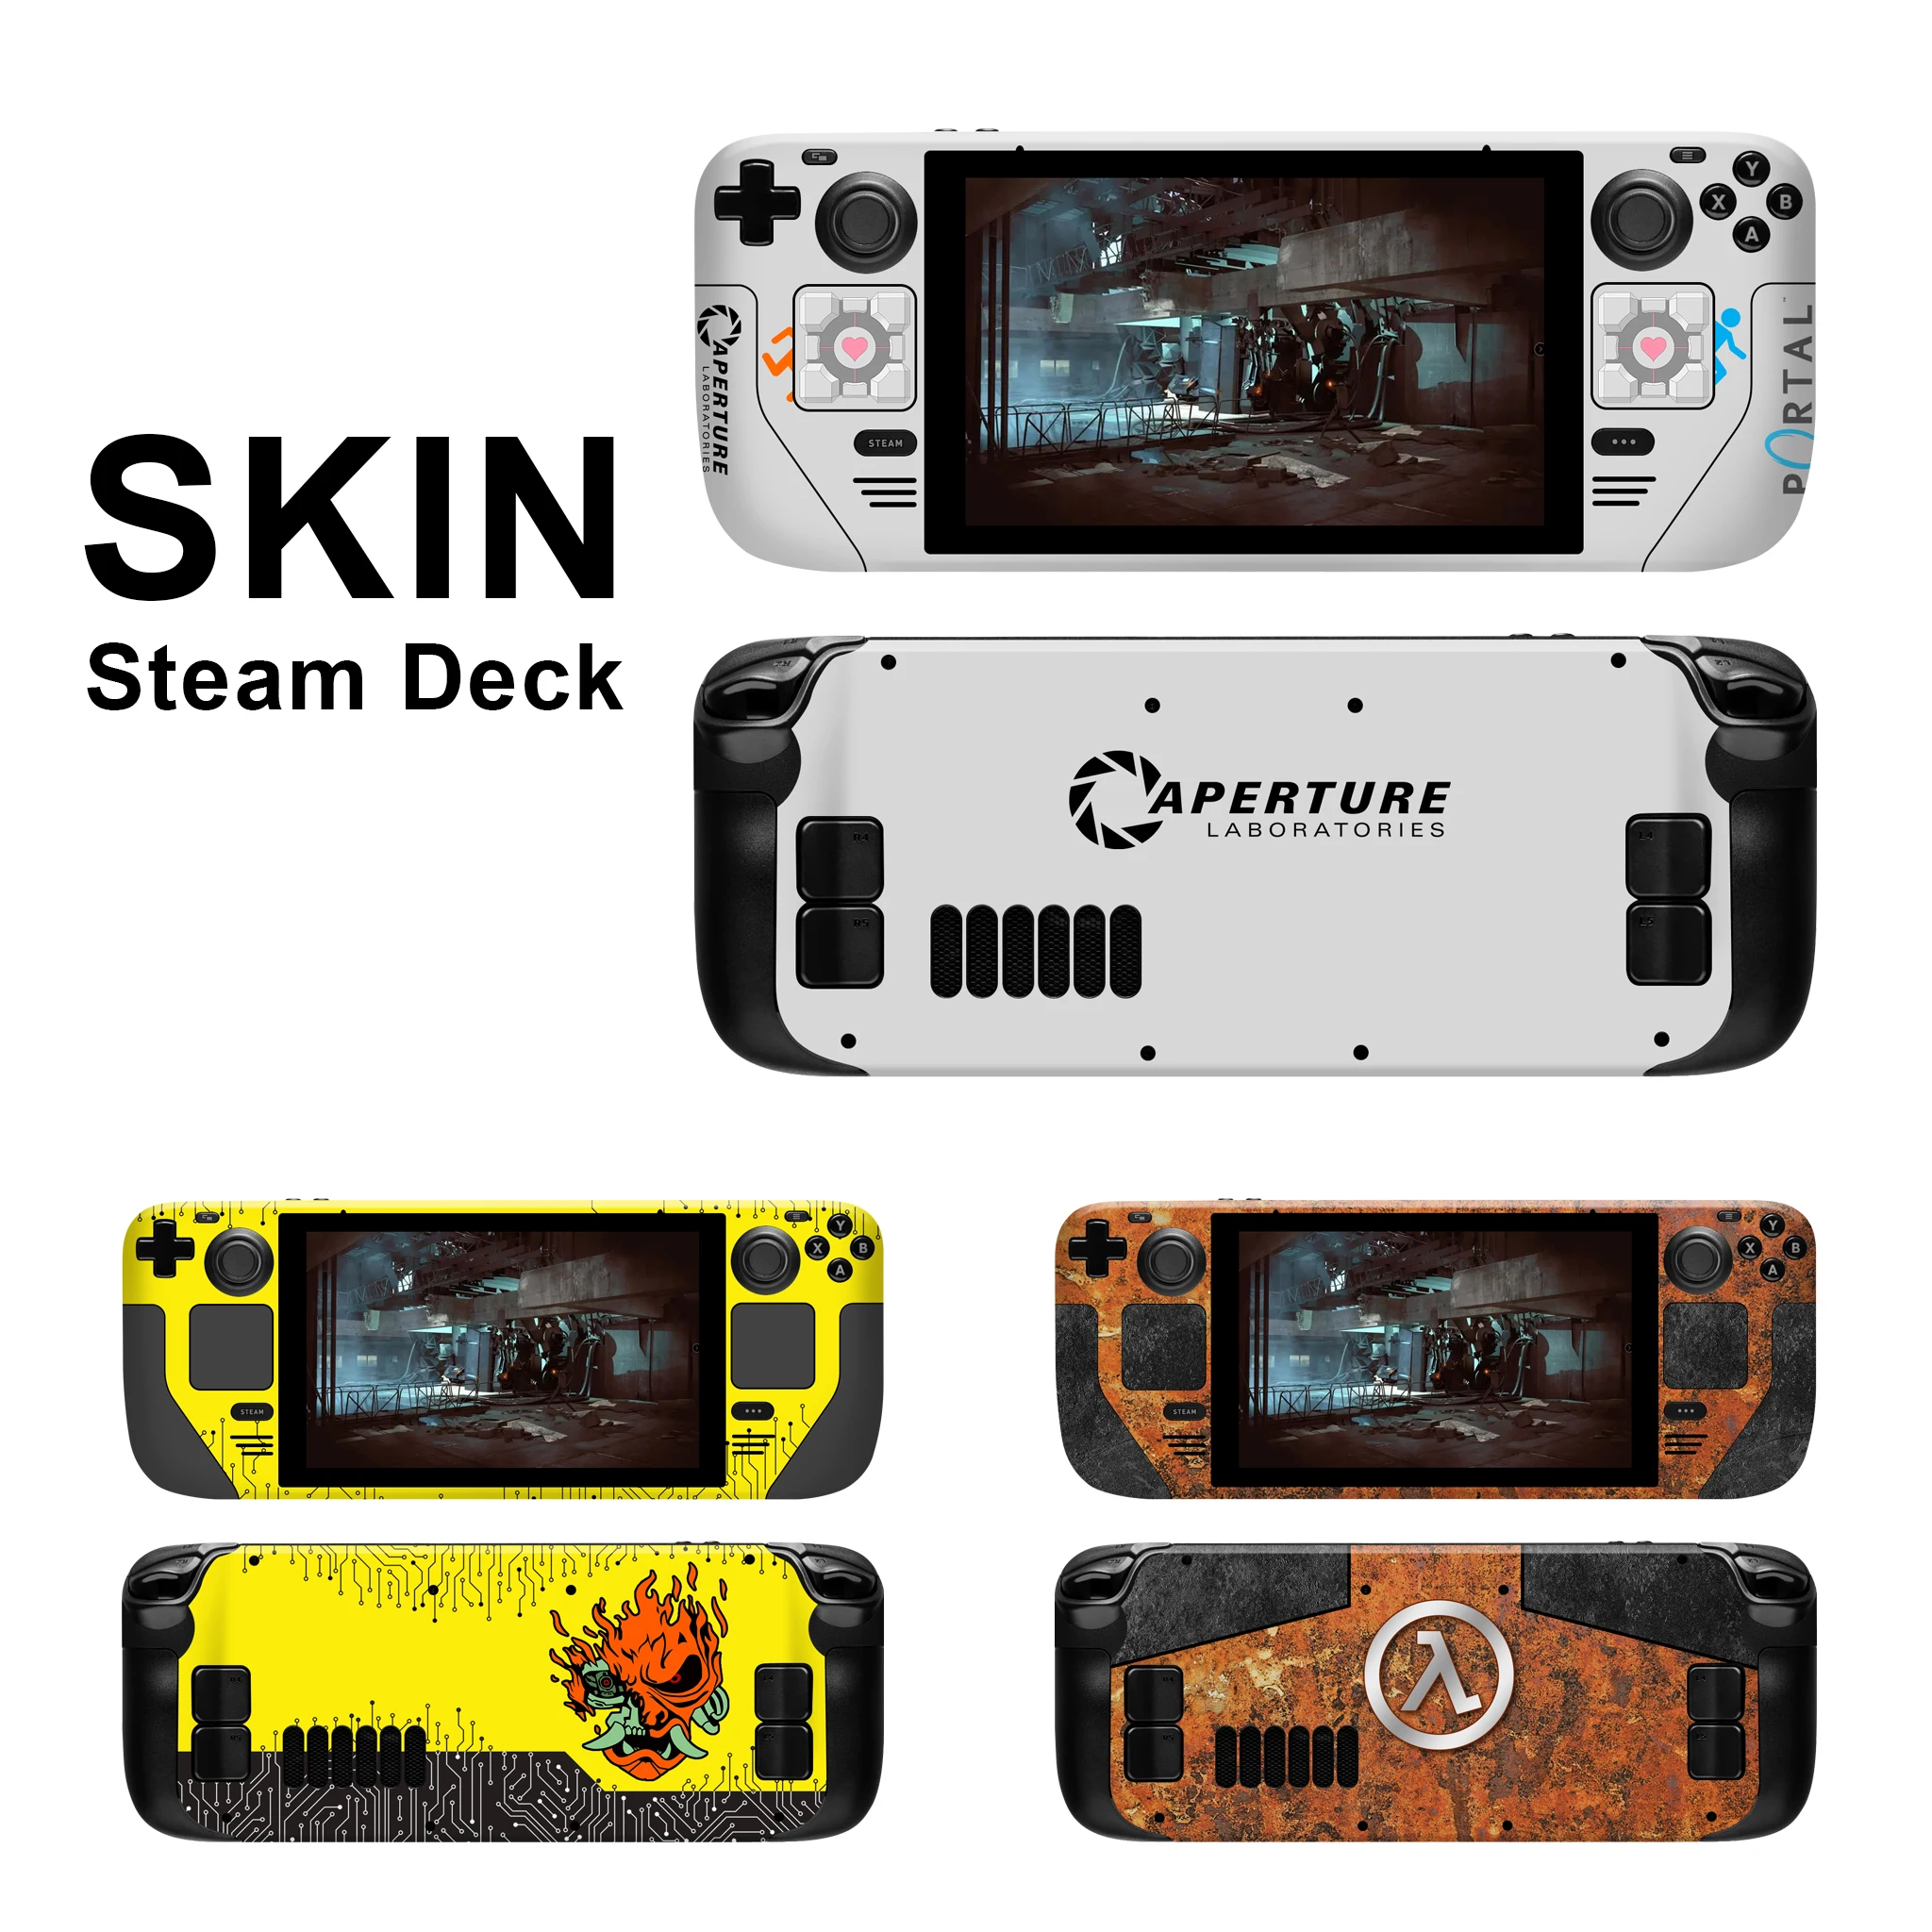 The Last Of Us Style Vinyl Sticker For Steam Deck Console